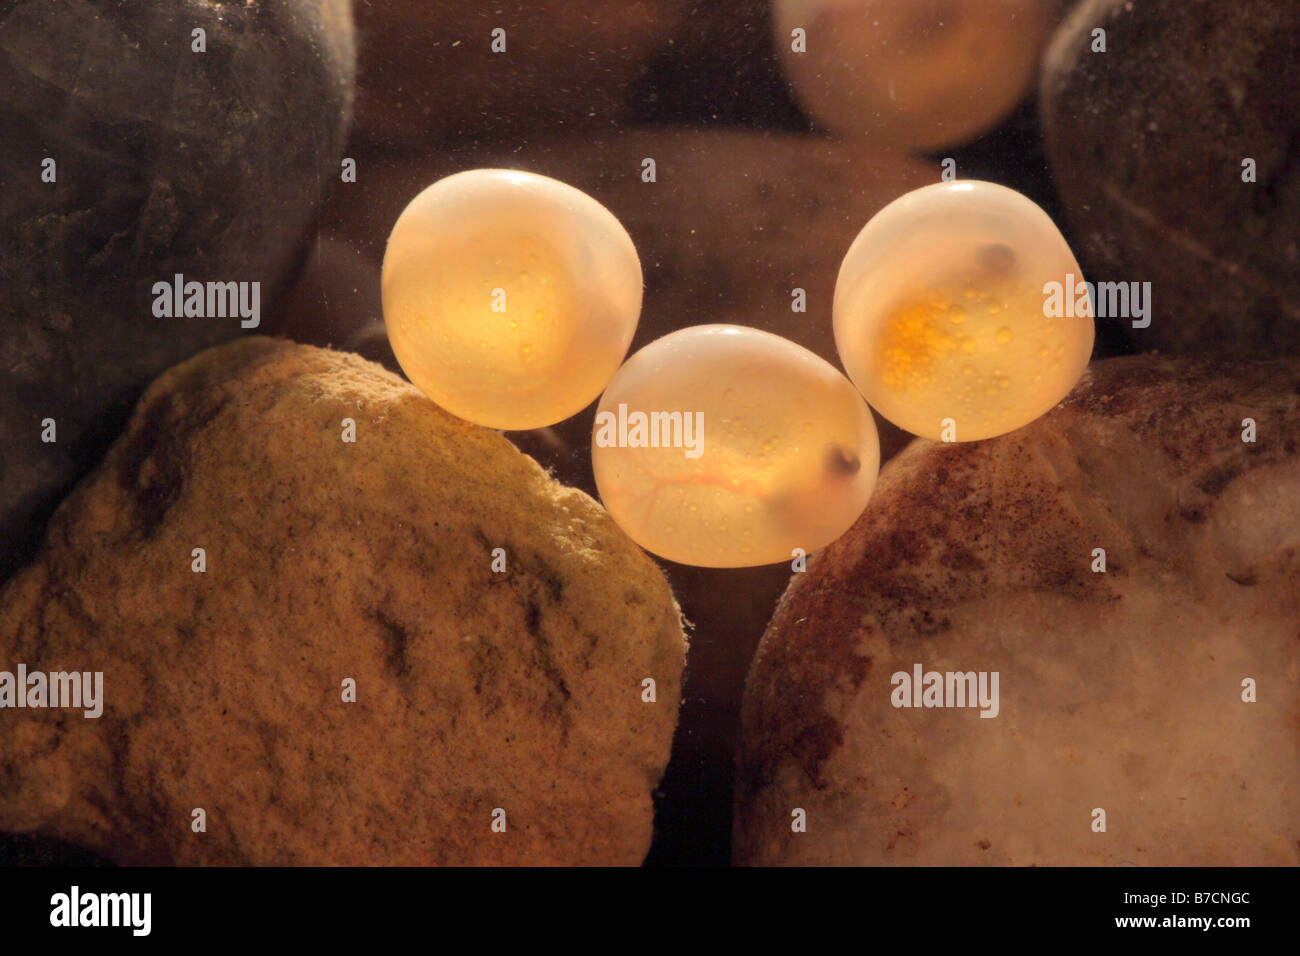 brown trout, river trout, brook trout (Salmo trutta fario), eggs between pebbles in backlight Stock Photo